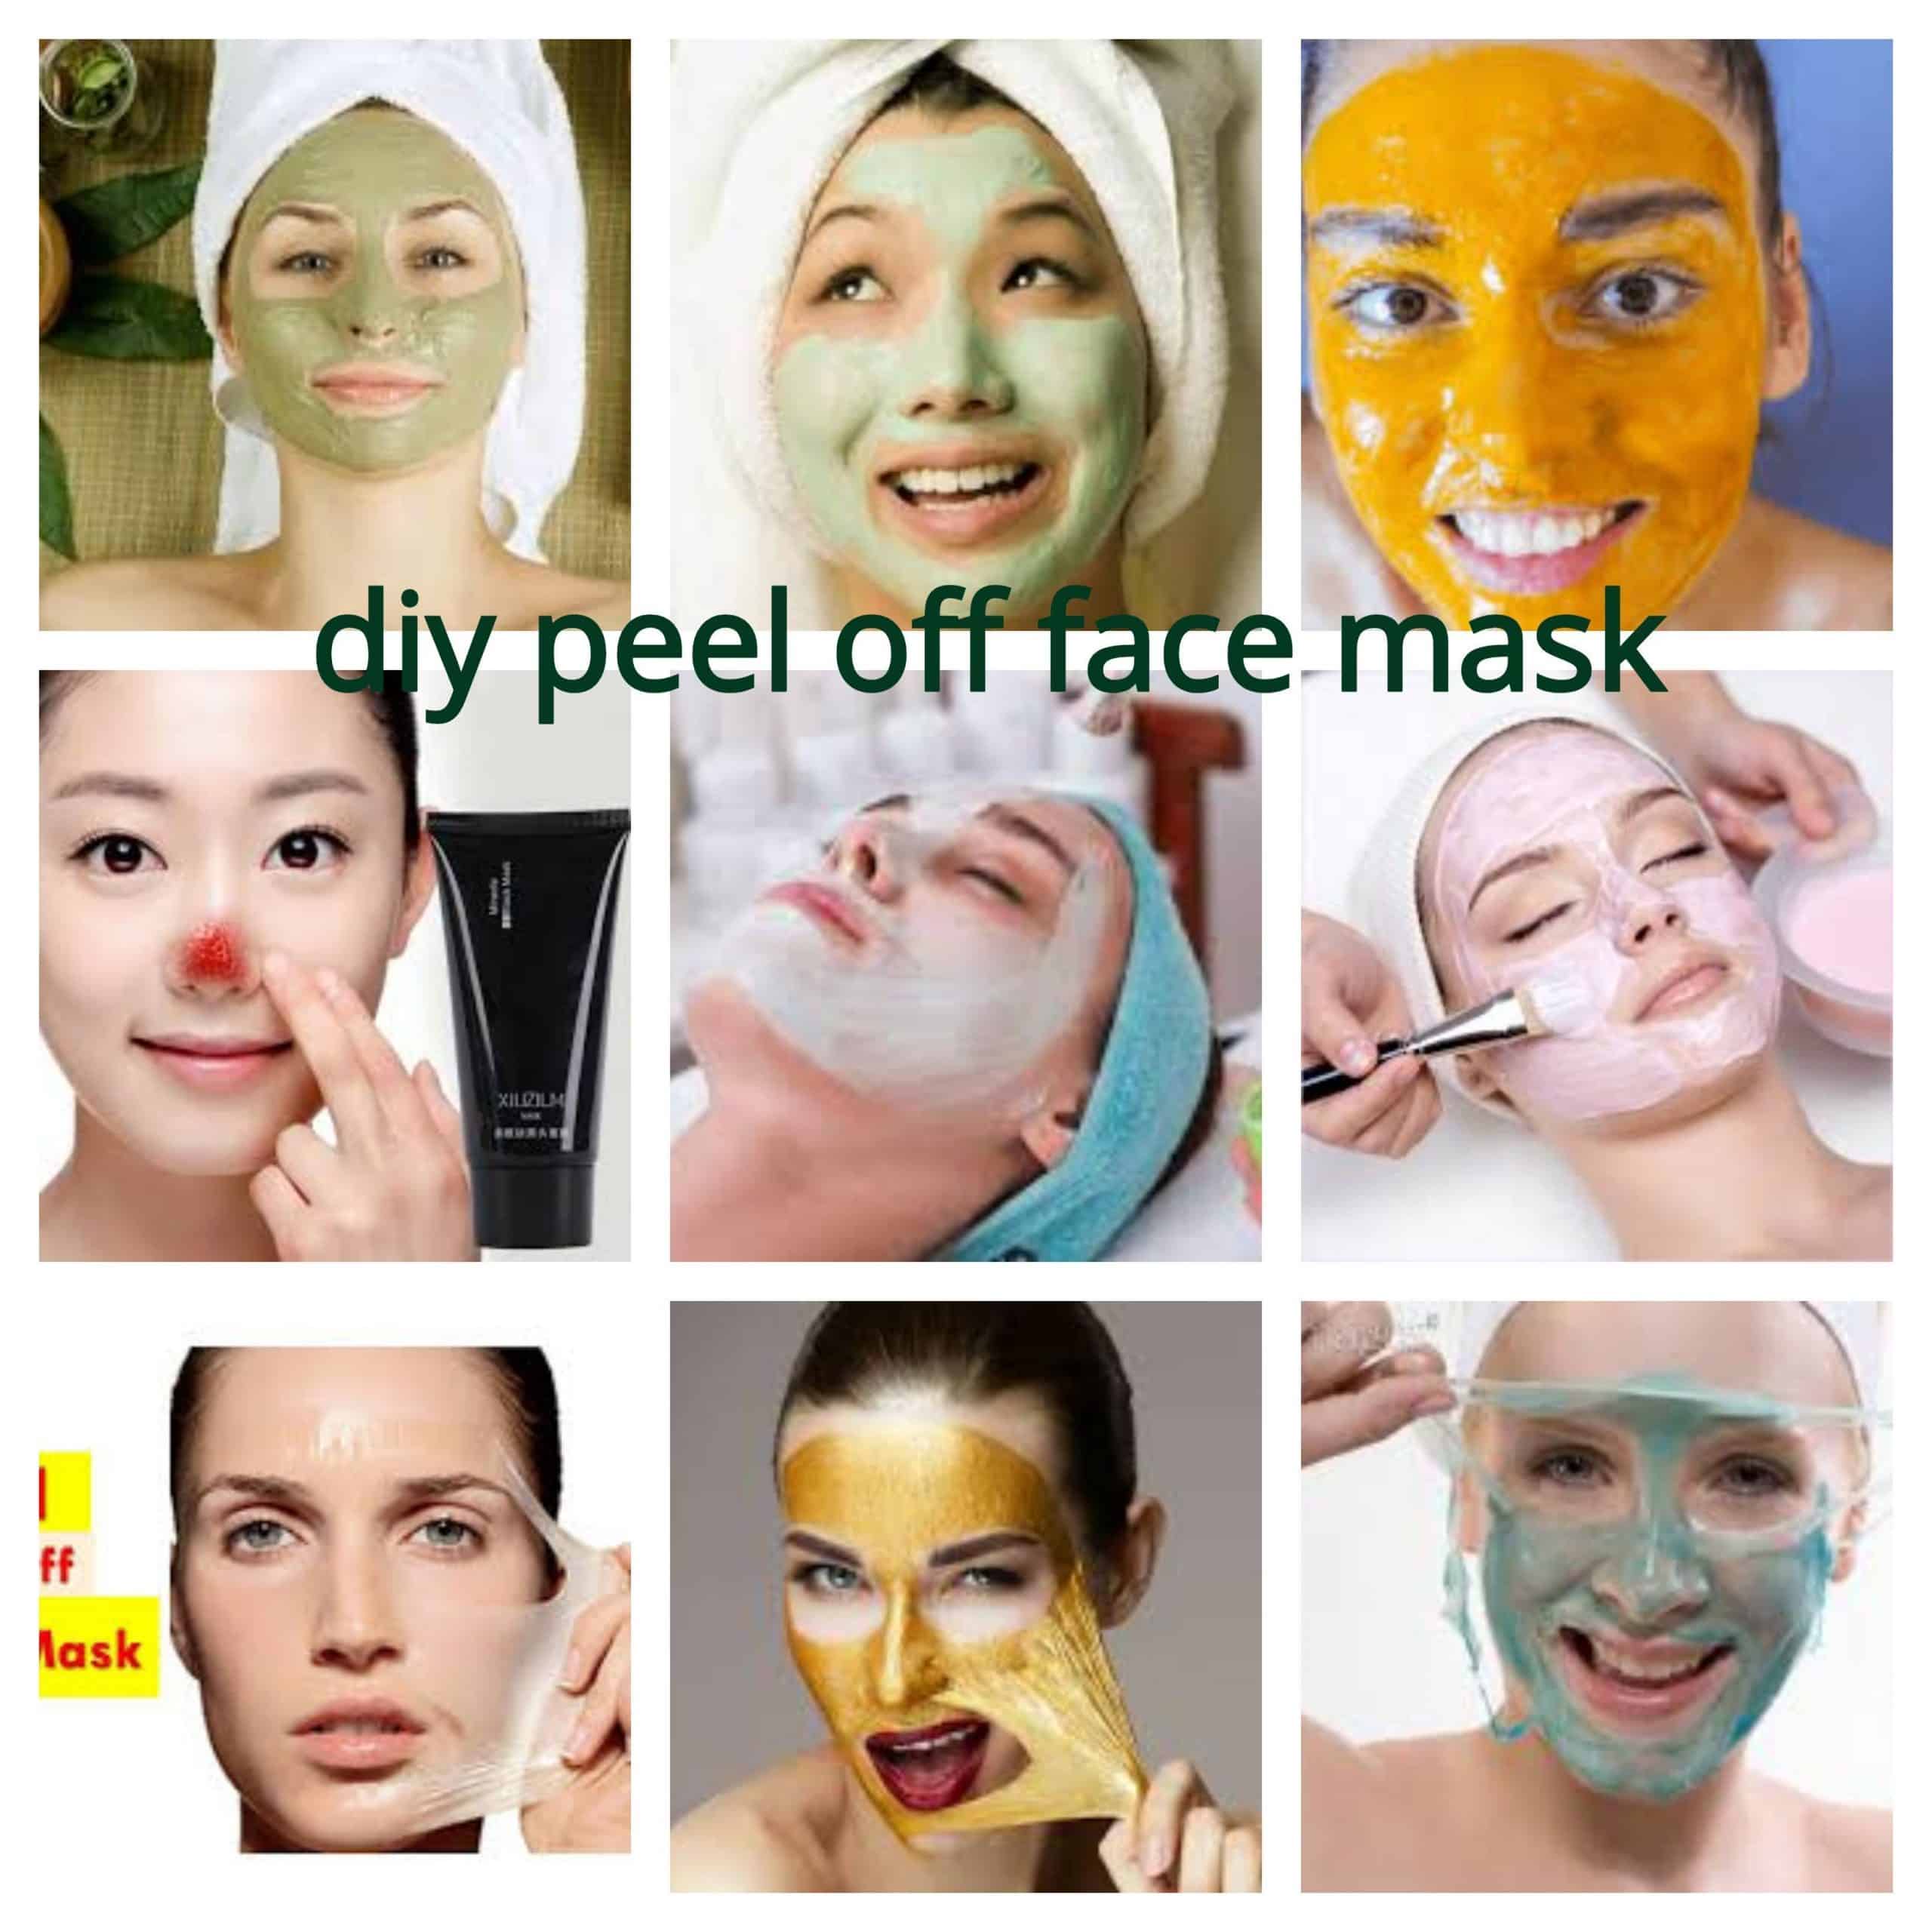 We are giving simple tips and recipes for DIY peel off face mask and ...